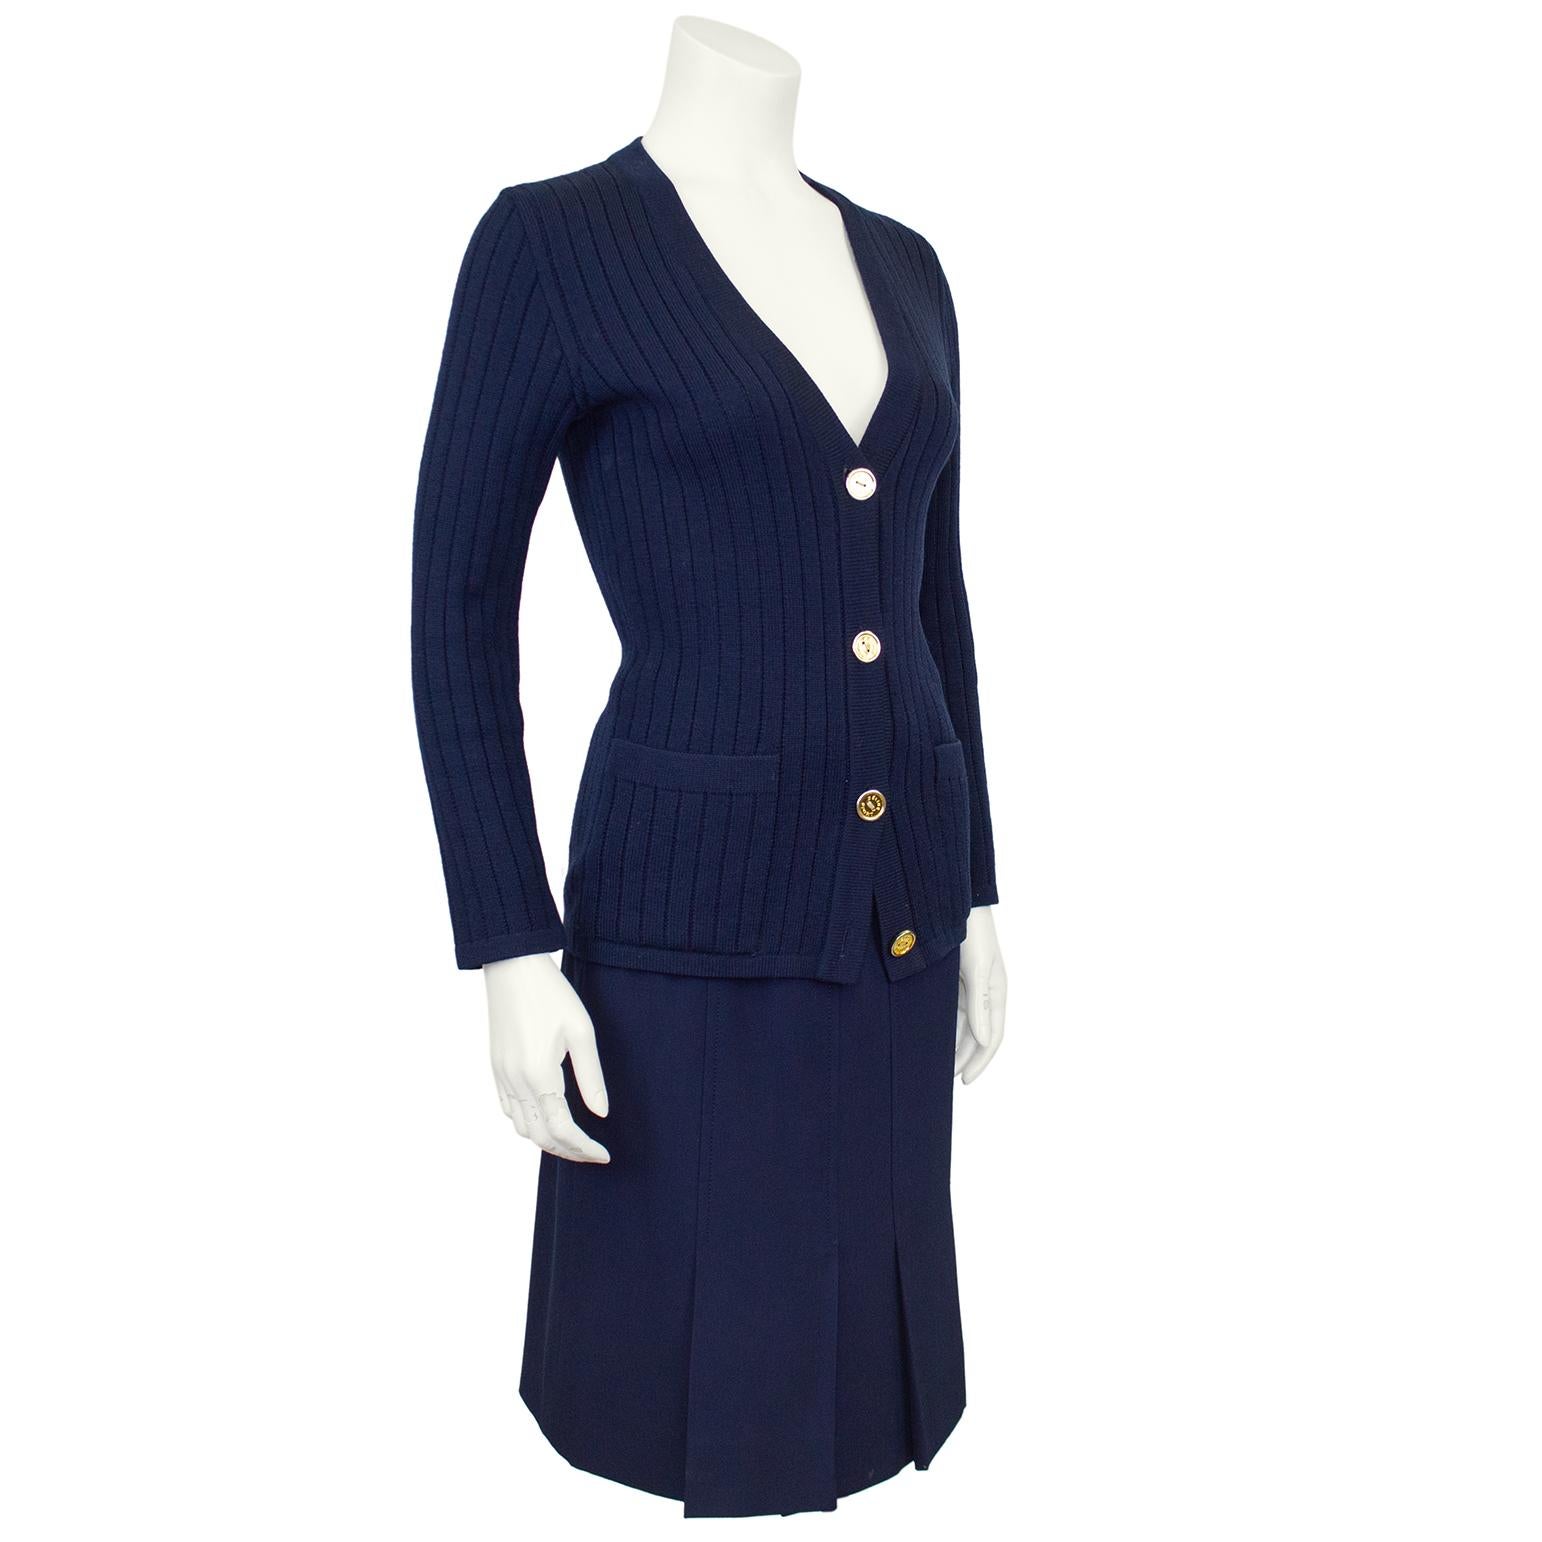 Classic and timeless Celine 100% wool navy blue cardigan and gabardine skirt ensemble from the 1970's. The set features a ribbed v neck cardigan with gold tone metal accents. Slit pockets at the hips with beige embroidered logo on the left hip and